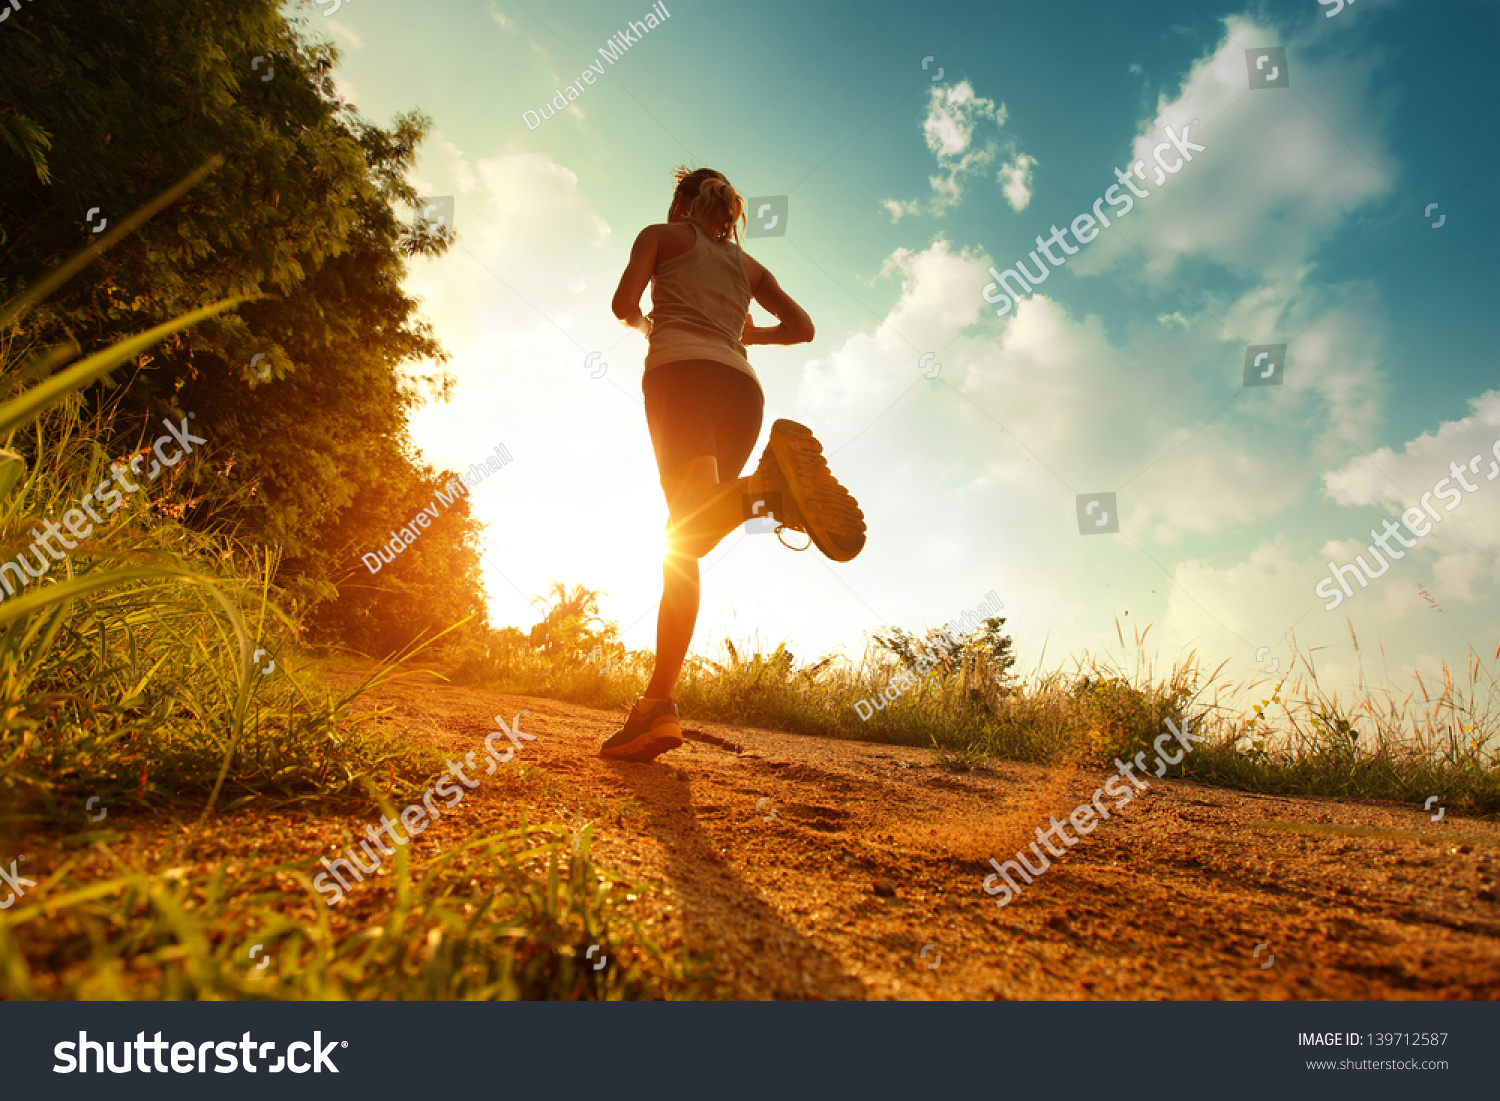 Young lady running on a rural road during sunset #139712587